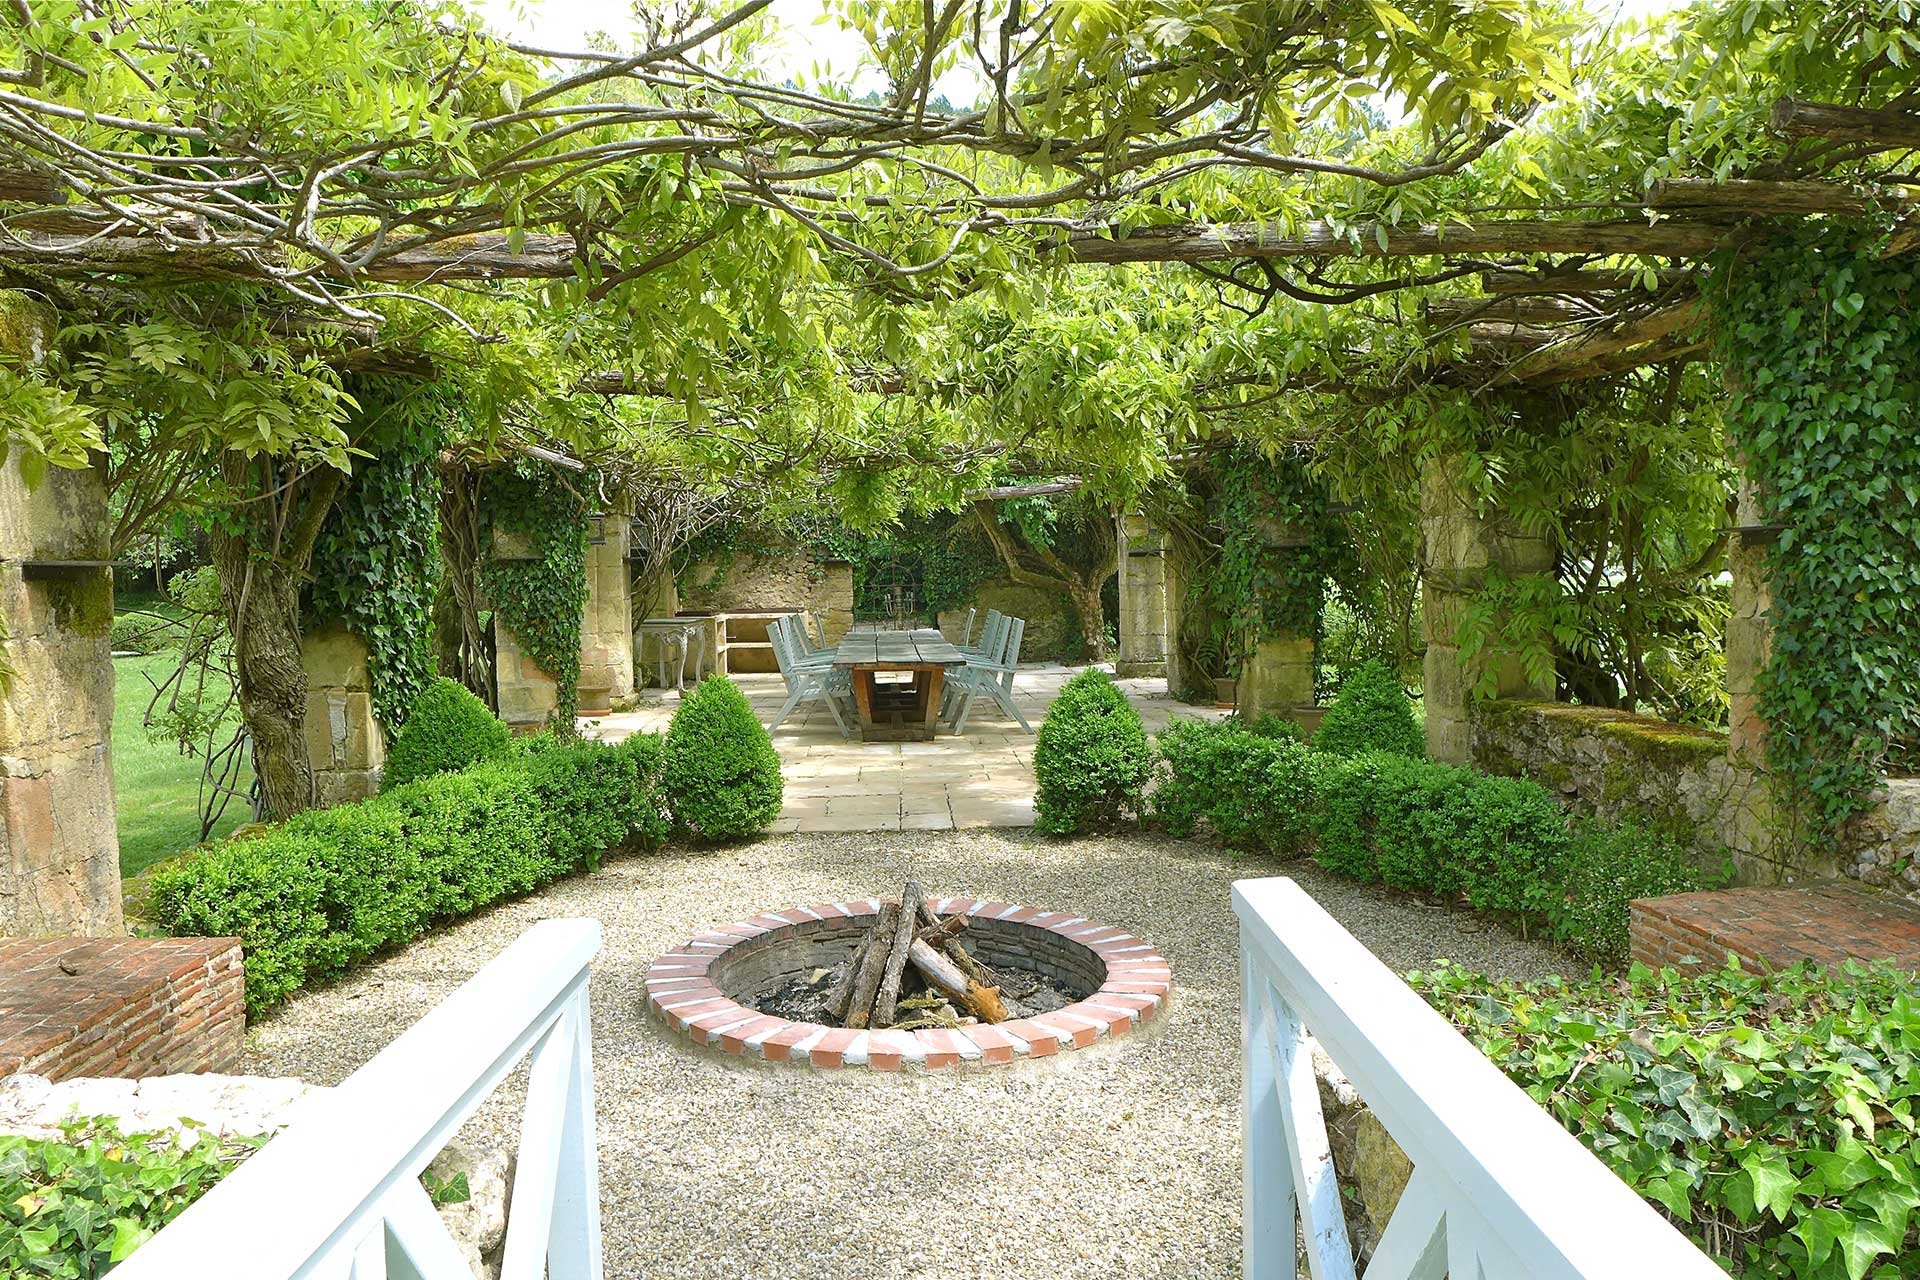 This 182-acre château estate in the Perigord region of the Dordogne features a courtyard garden with a dining terrace and fire pit from which to enjoy delightful summer evenings.